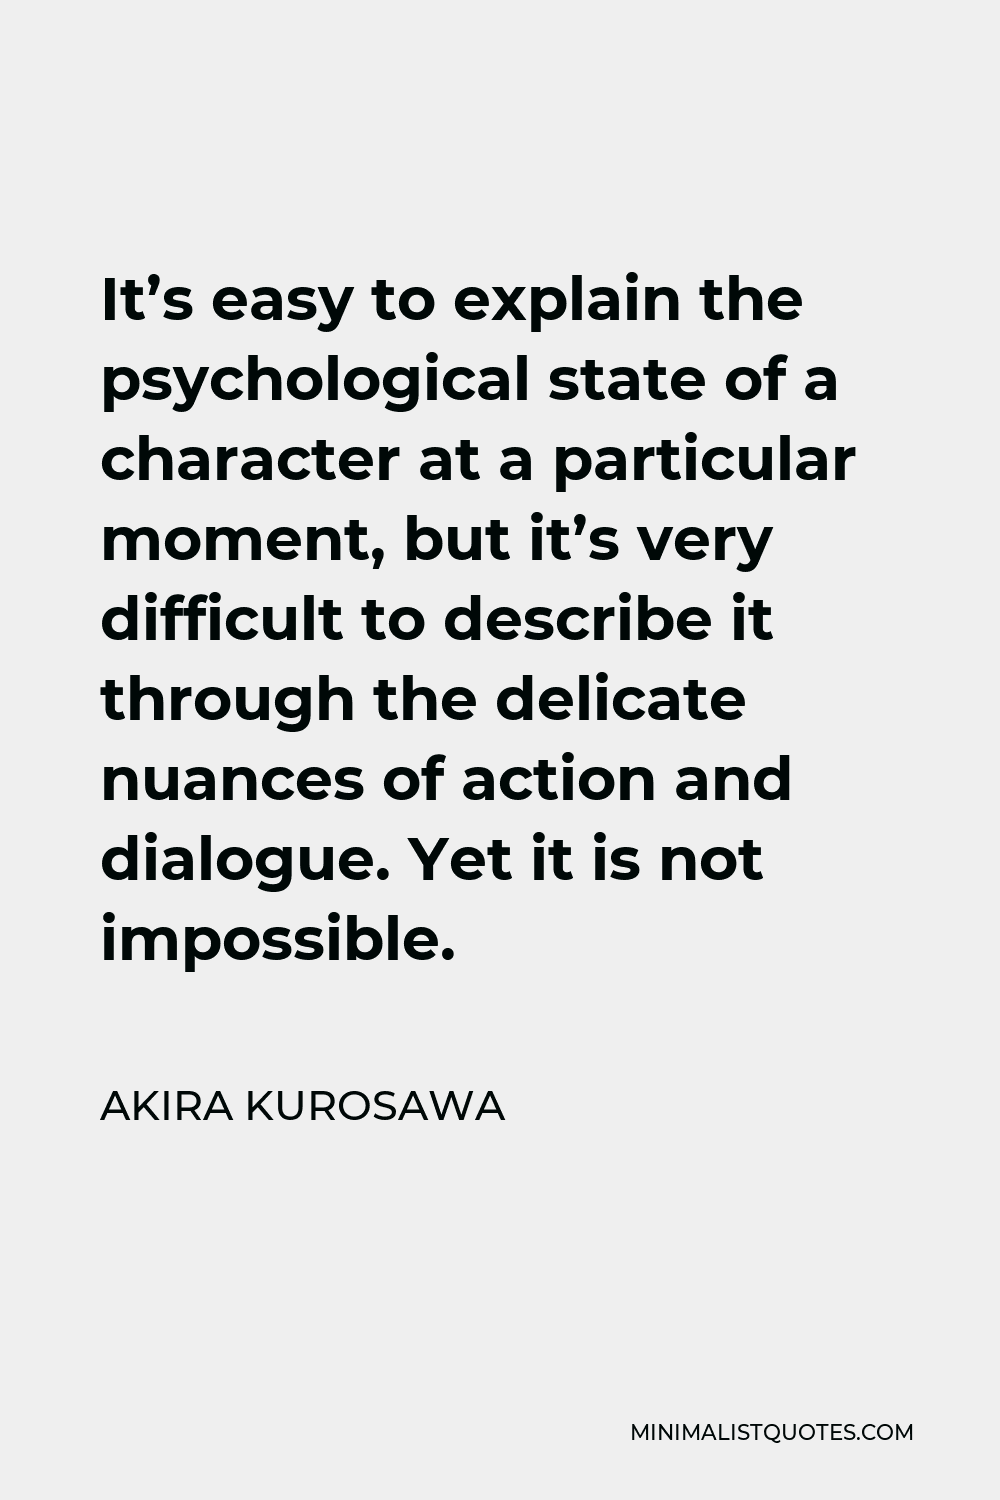 Akira Kurosawa Quote - It’s easy to explain the psychological state of a character at a particular moment, but it’s very difficult to describe it through the delicate nuances of action and dialogue. Yet it is not impossible.